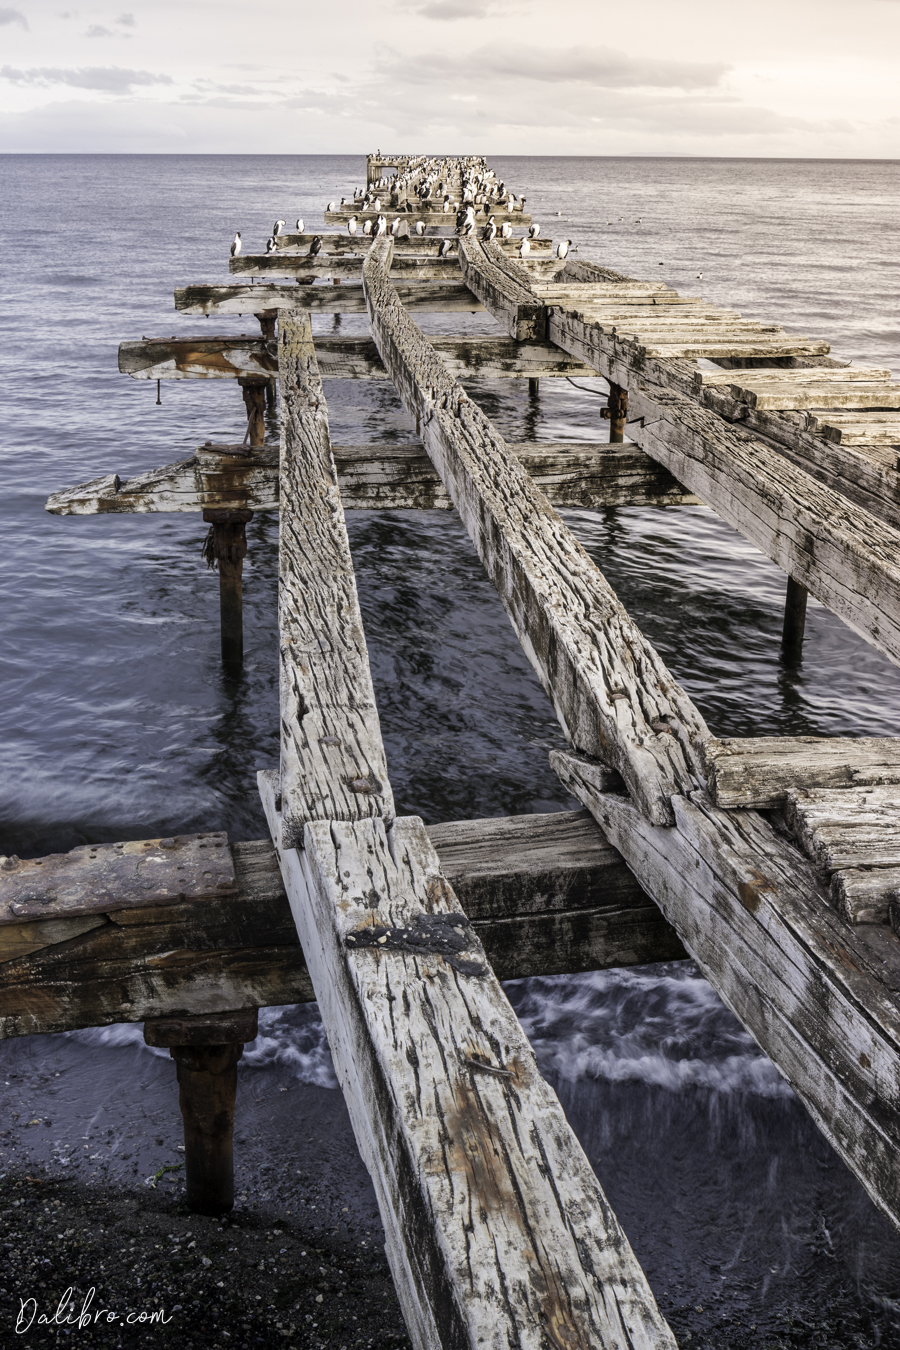 The old pier in Punta Arenas - one of the best photo spots in the city